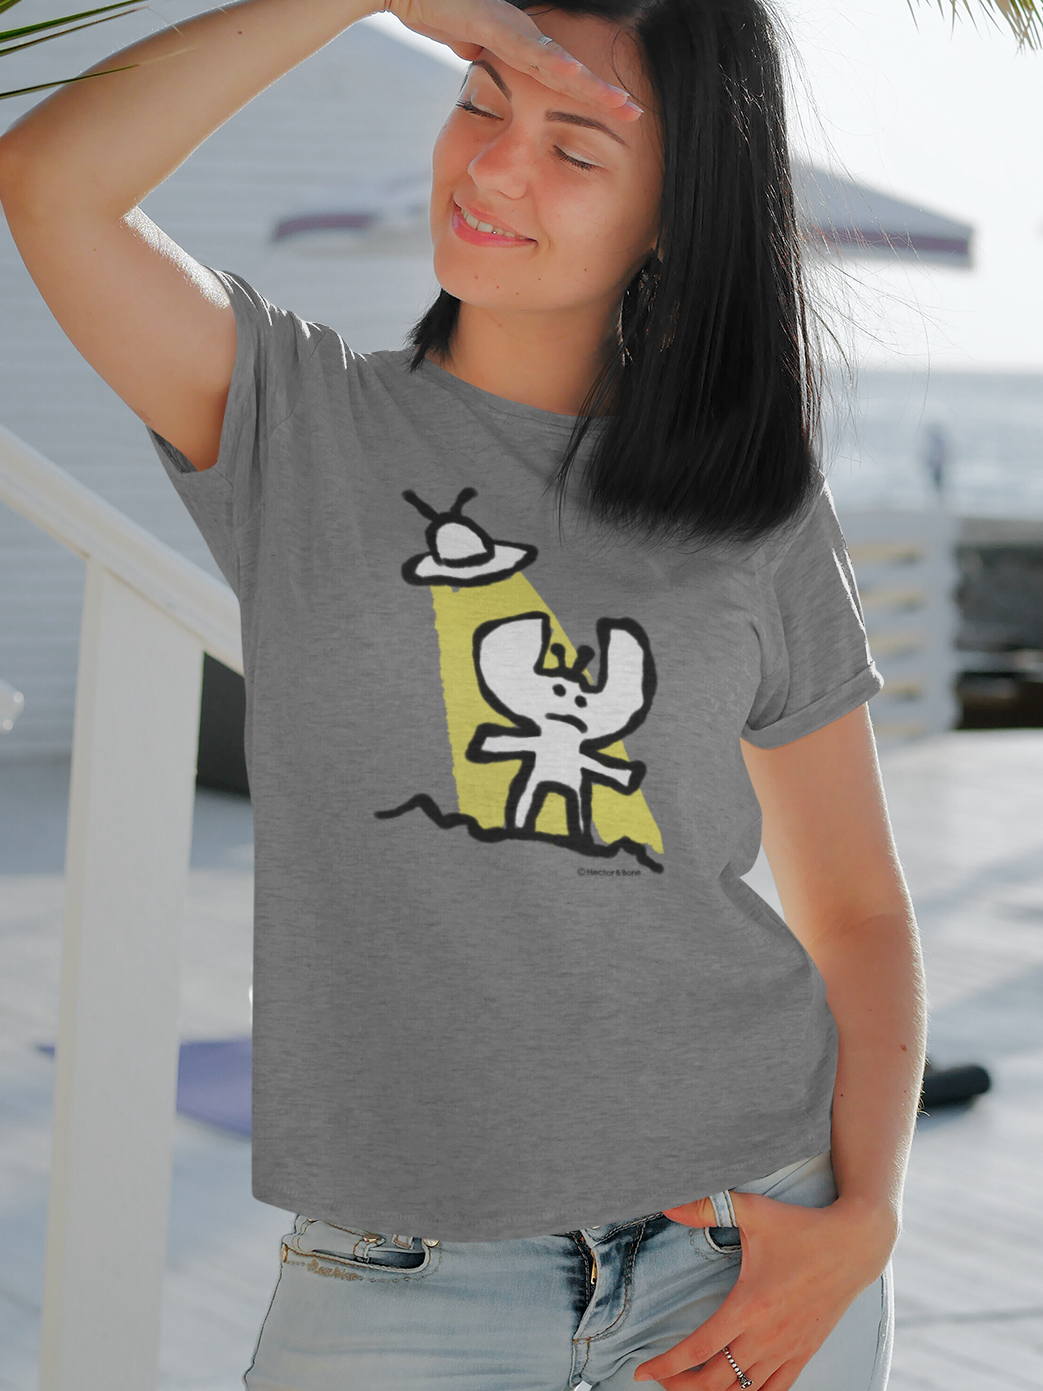 Alien T-shirt - Young woman wearing a cute Alien t-shirt illustrated on a mid heather grey vegan t-shirt by Hector and Bone